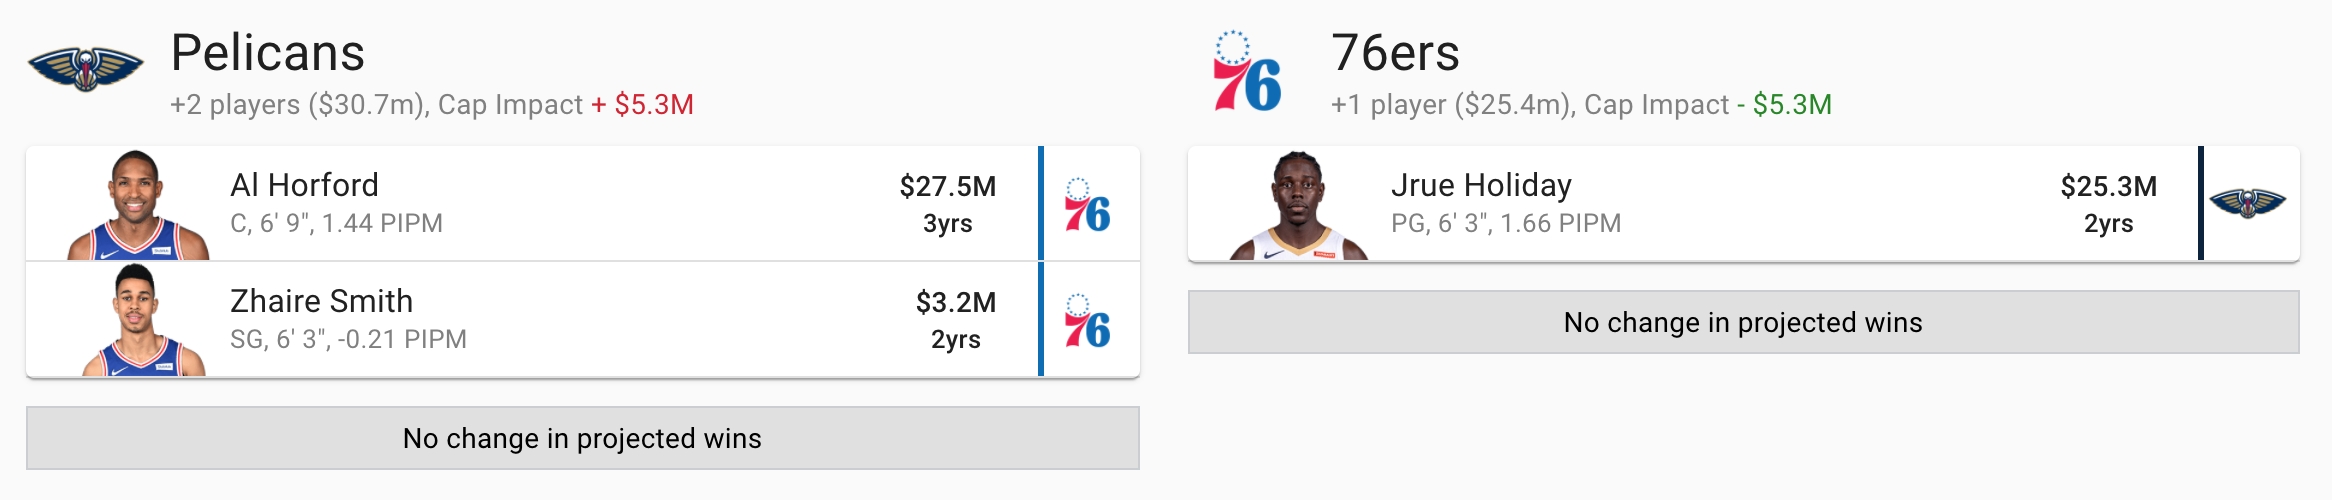 What Does A Jrue Holiday Trade To A Contender Look Like? - GoneTrending